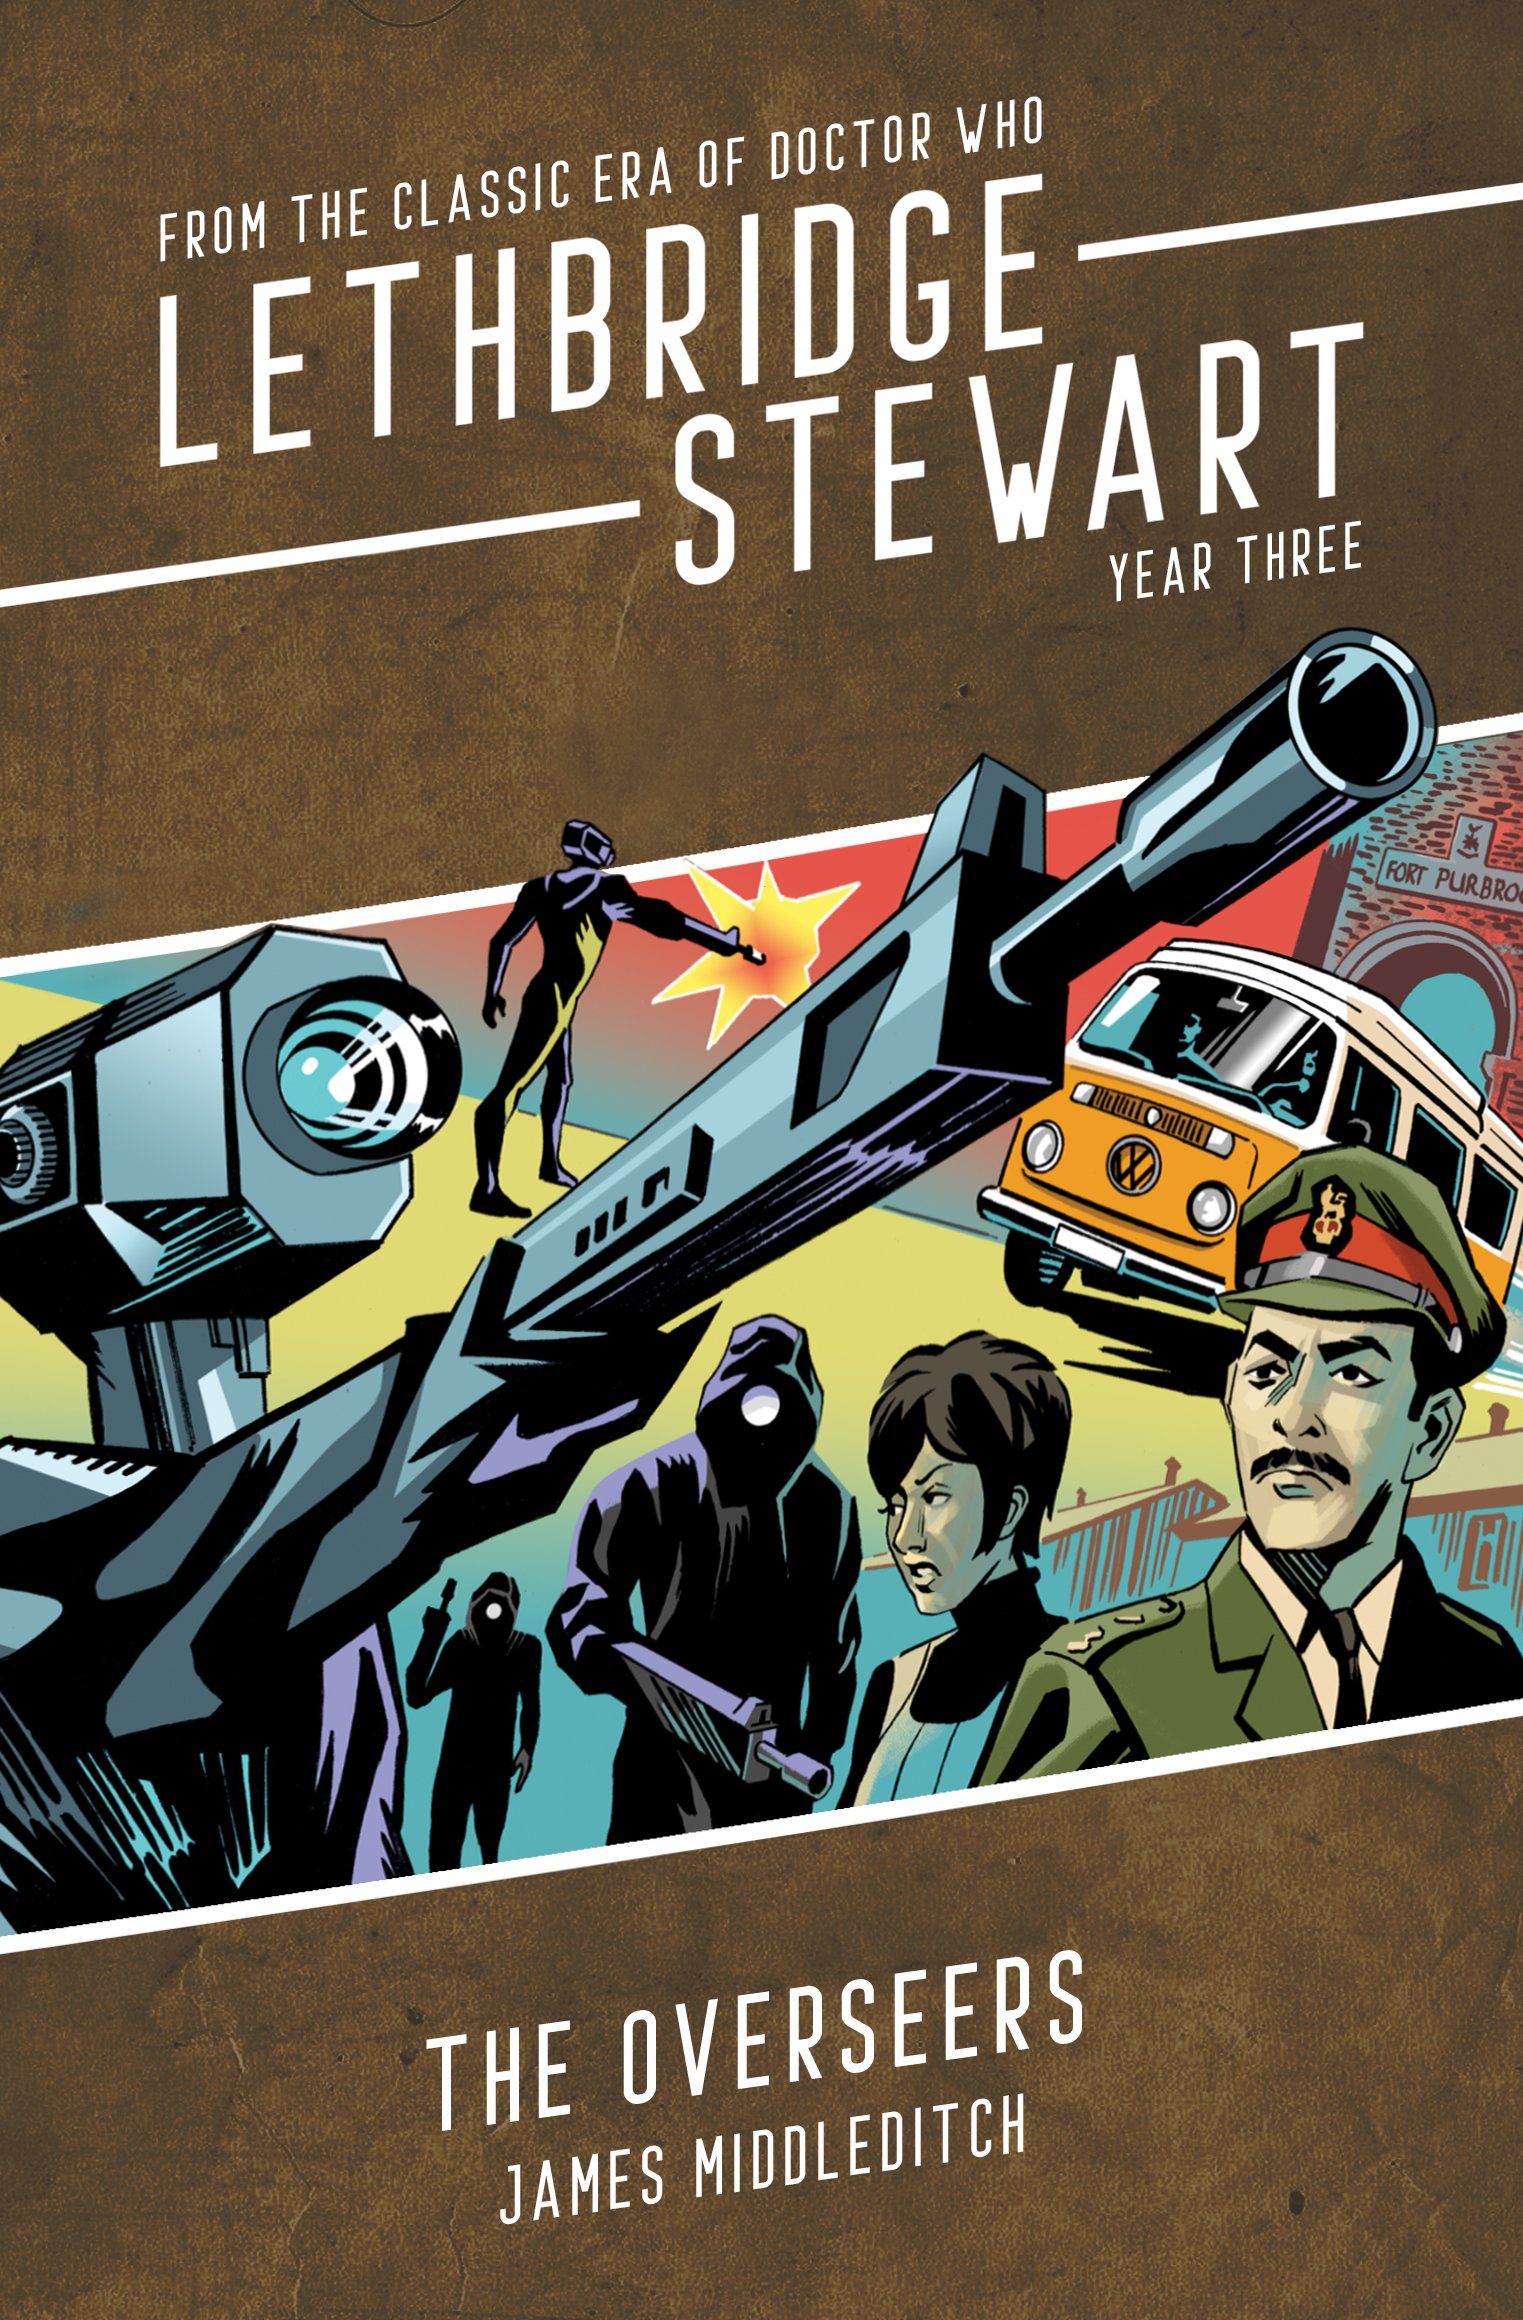 Coming Soon from Candy Jar Books: Lethbridge-Stewart — The Overseers